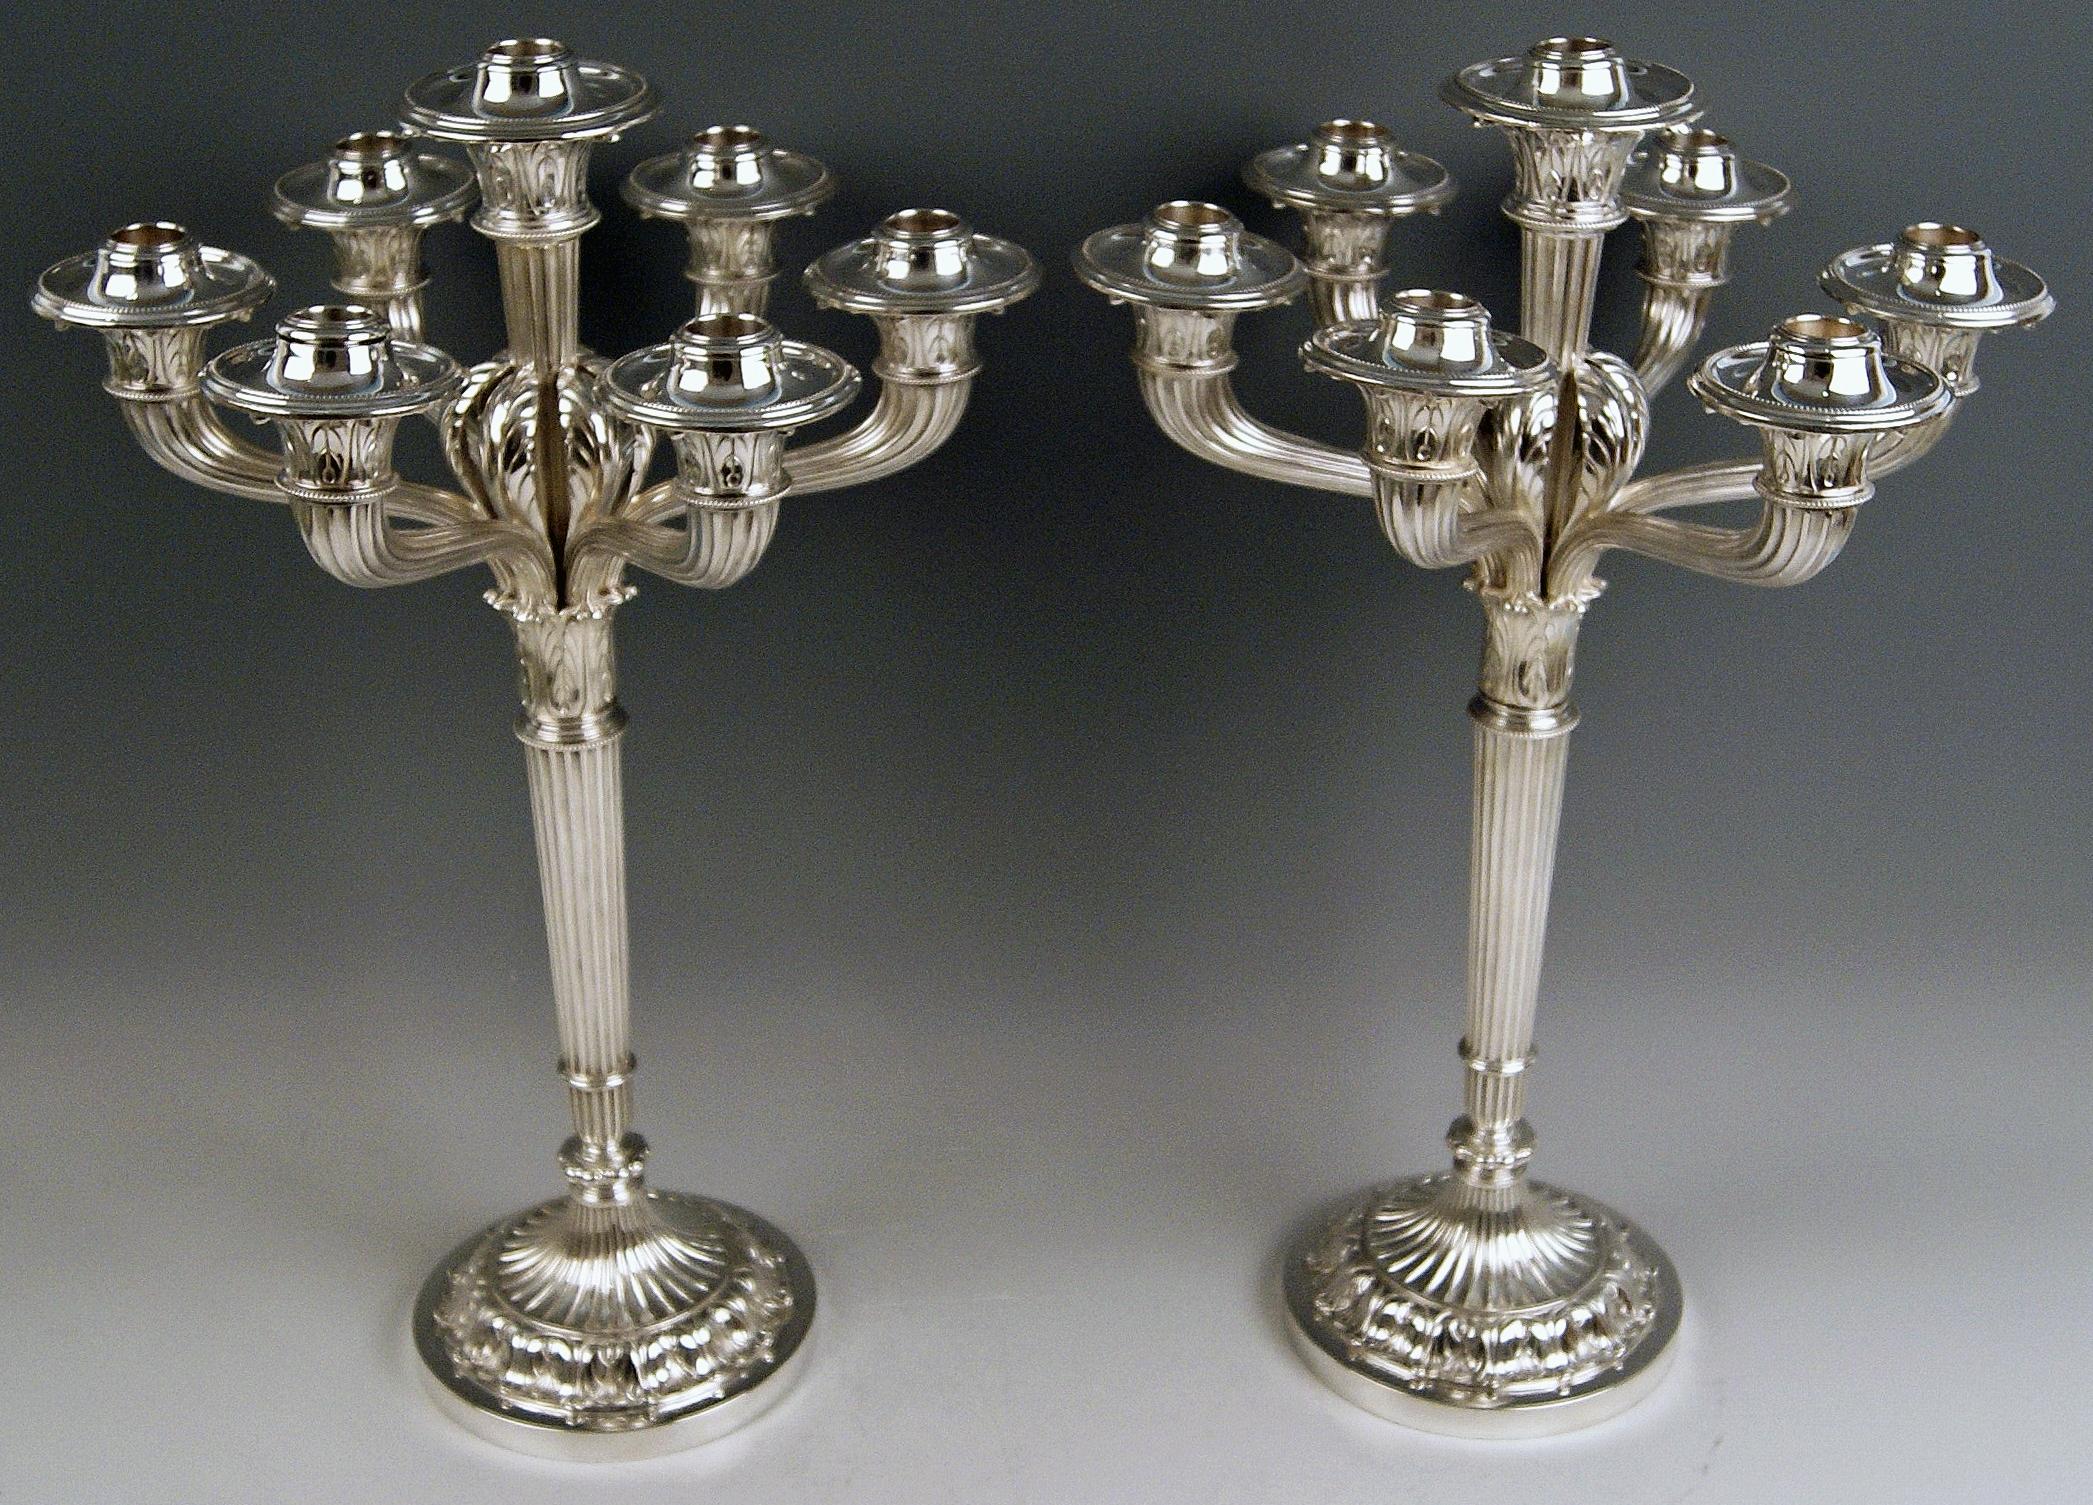 Victorian Silver Pair of Candlesticks Bruckmann & Sons Weight 206.27 oz Germany, 1882-1885